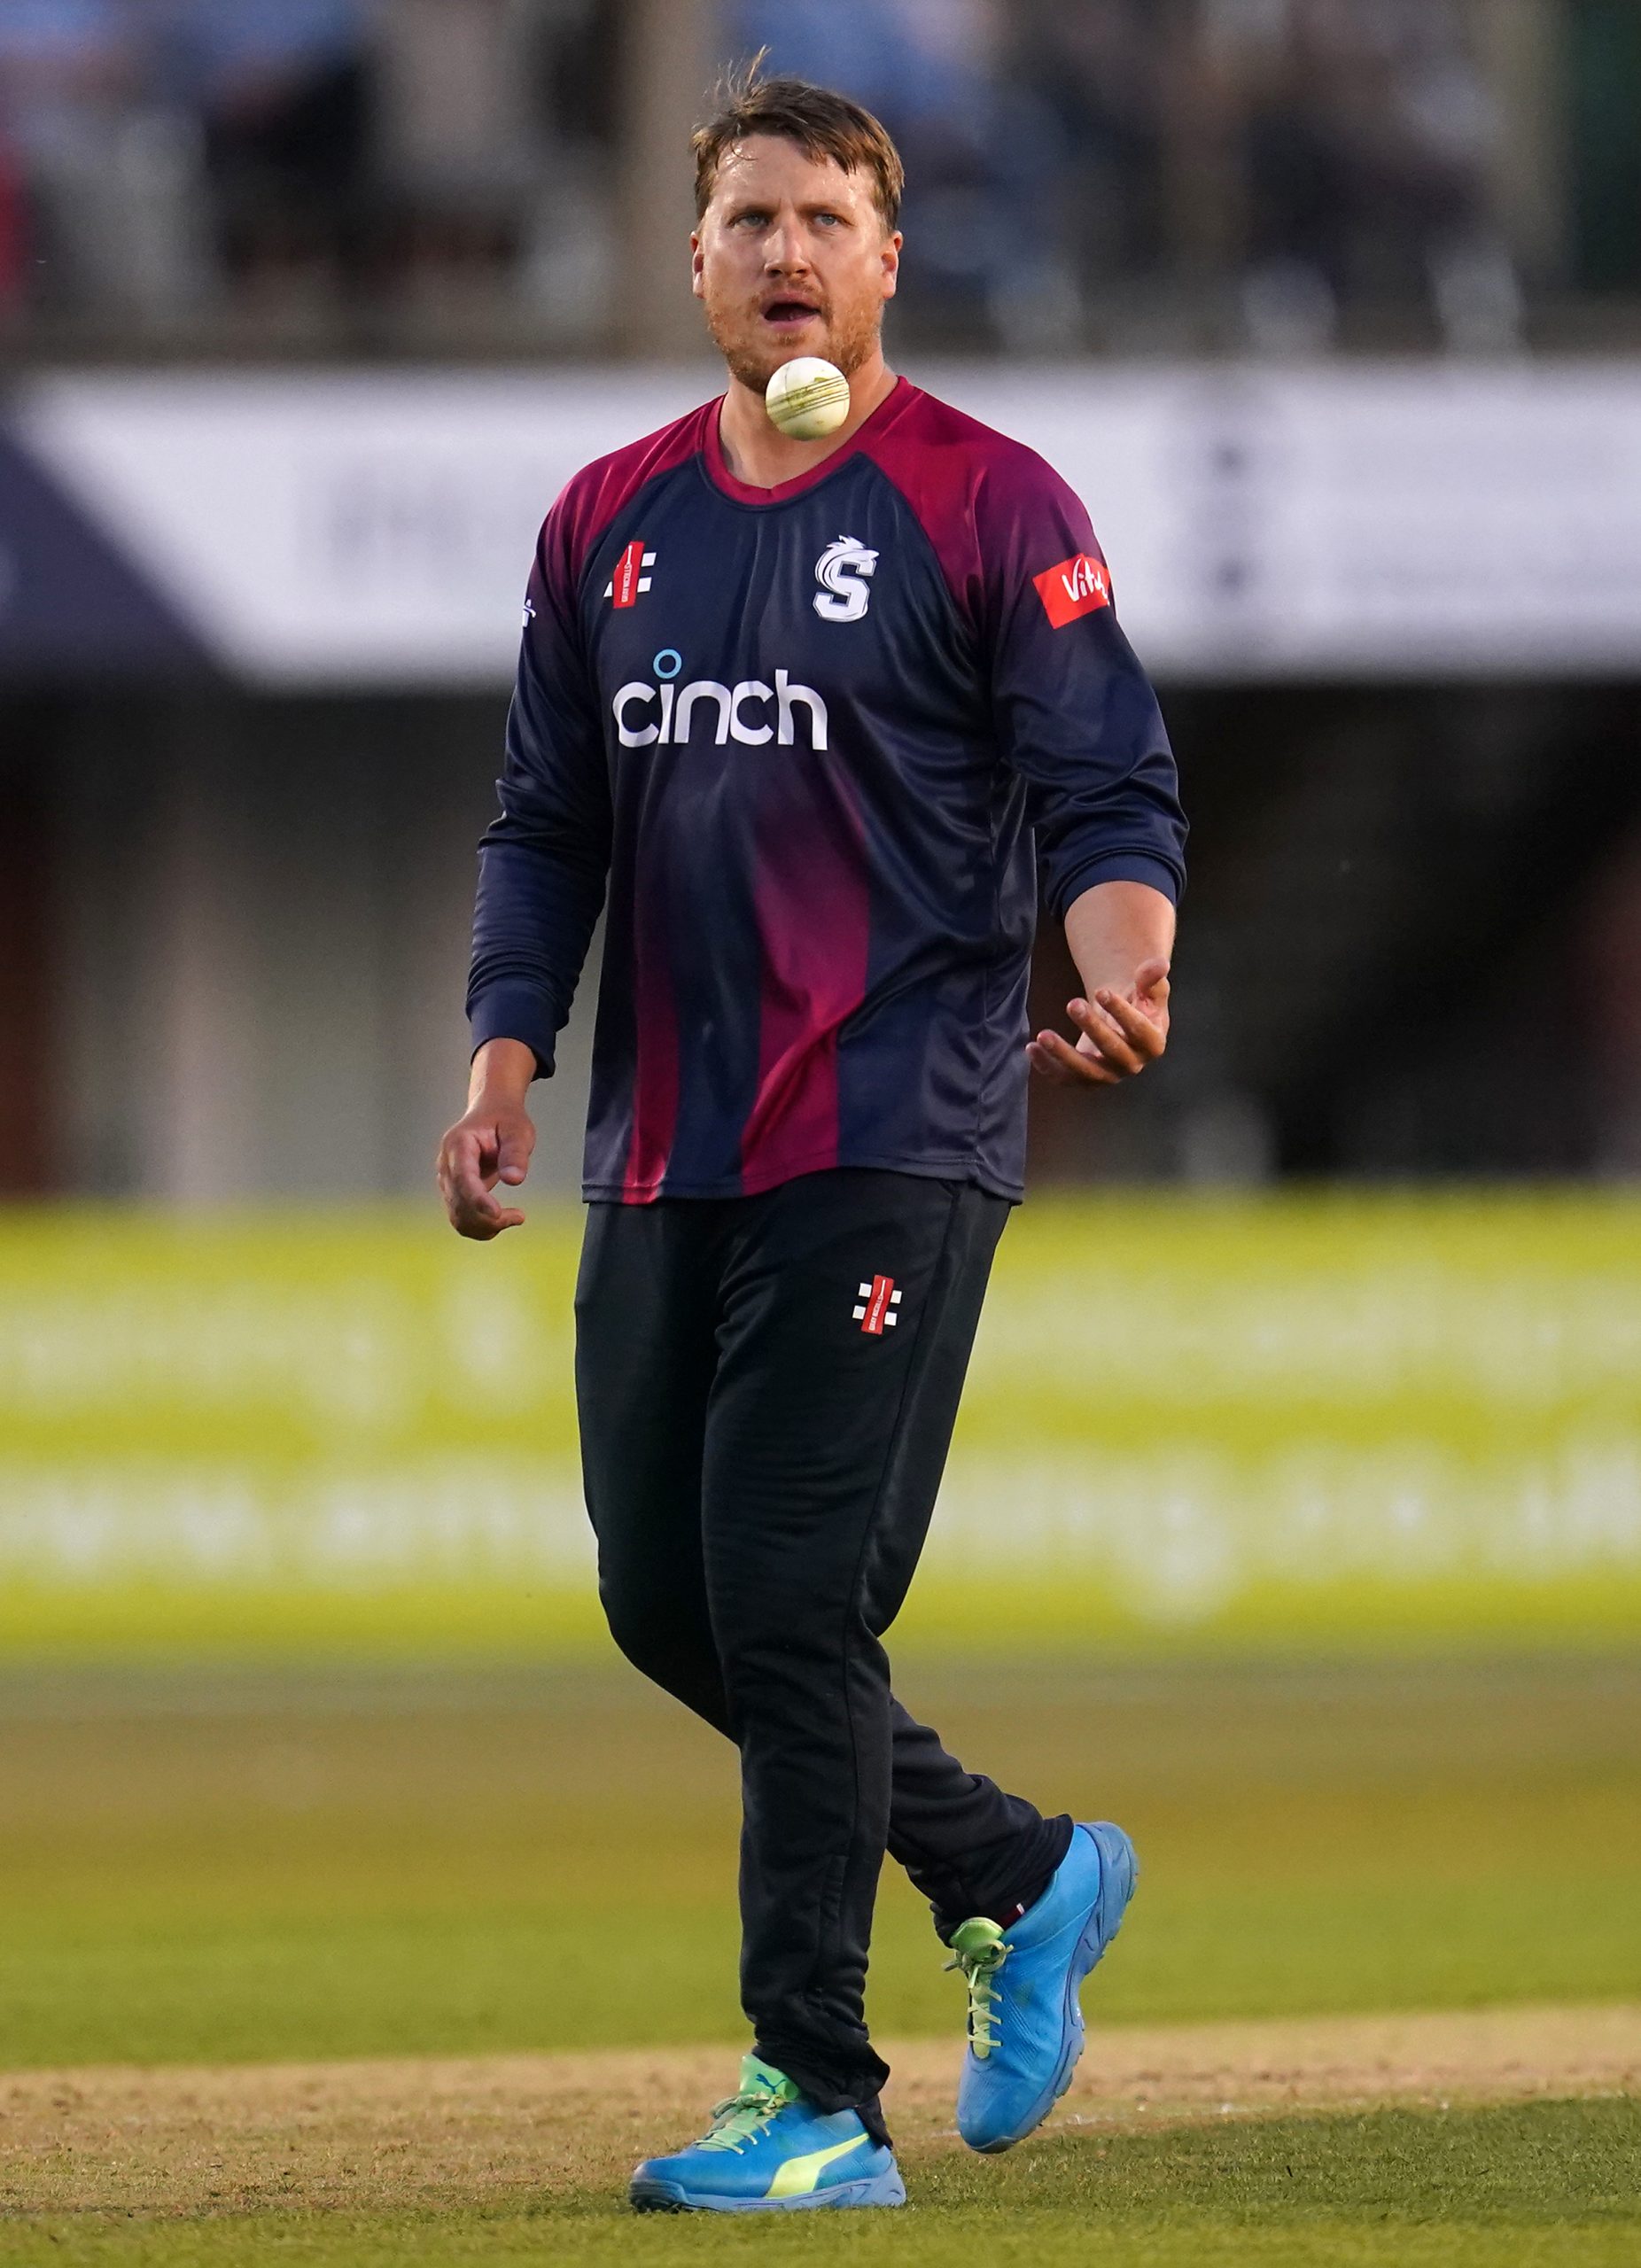 Josh Cobb shocked to be replaced by David Willey as Northamptonshire T20 captain